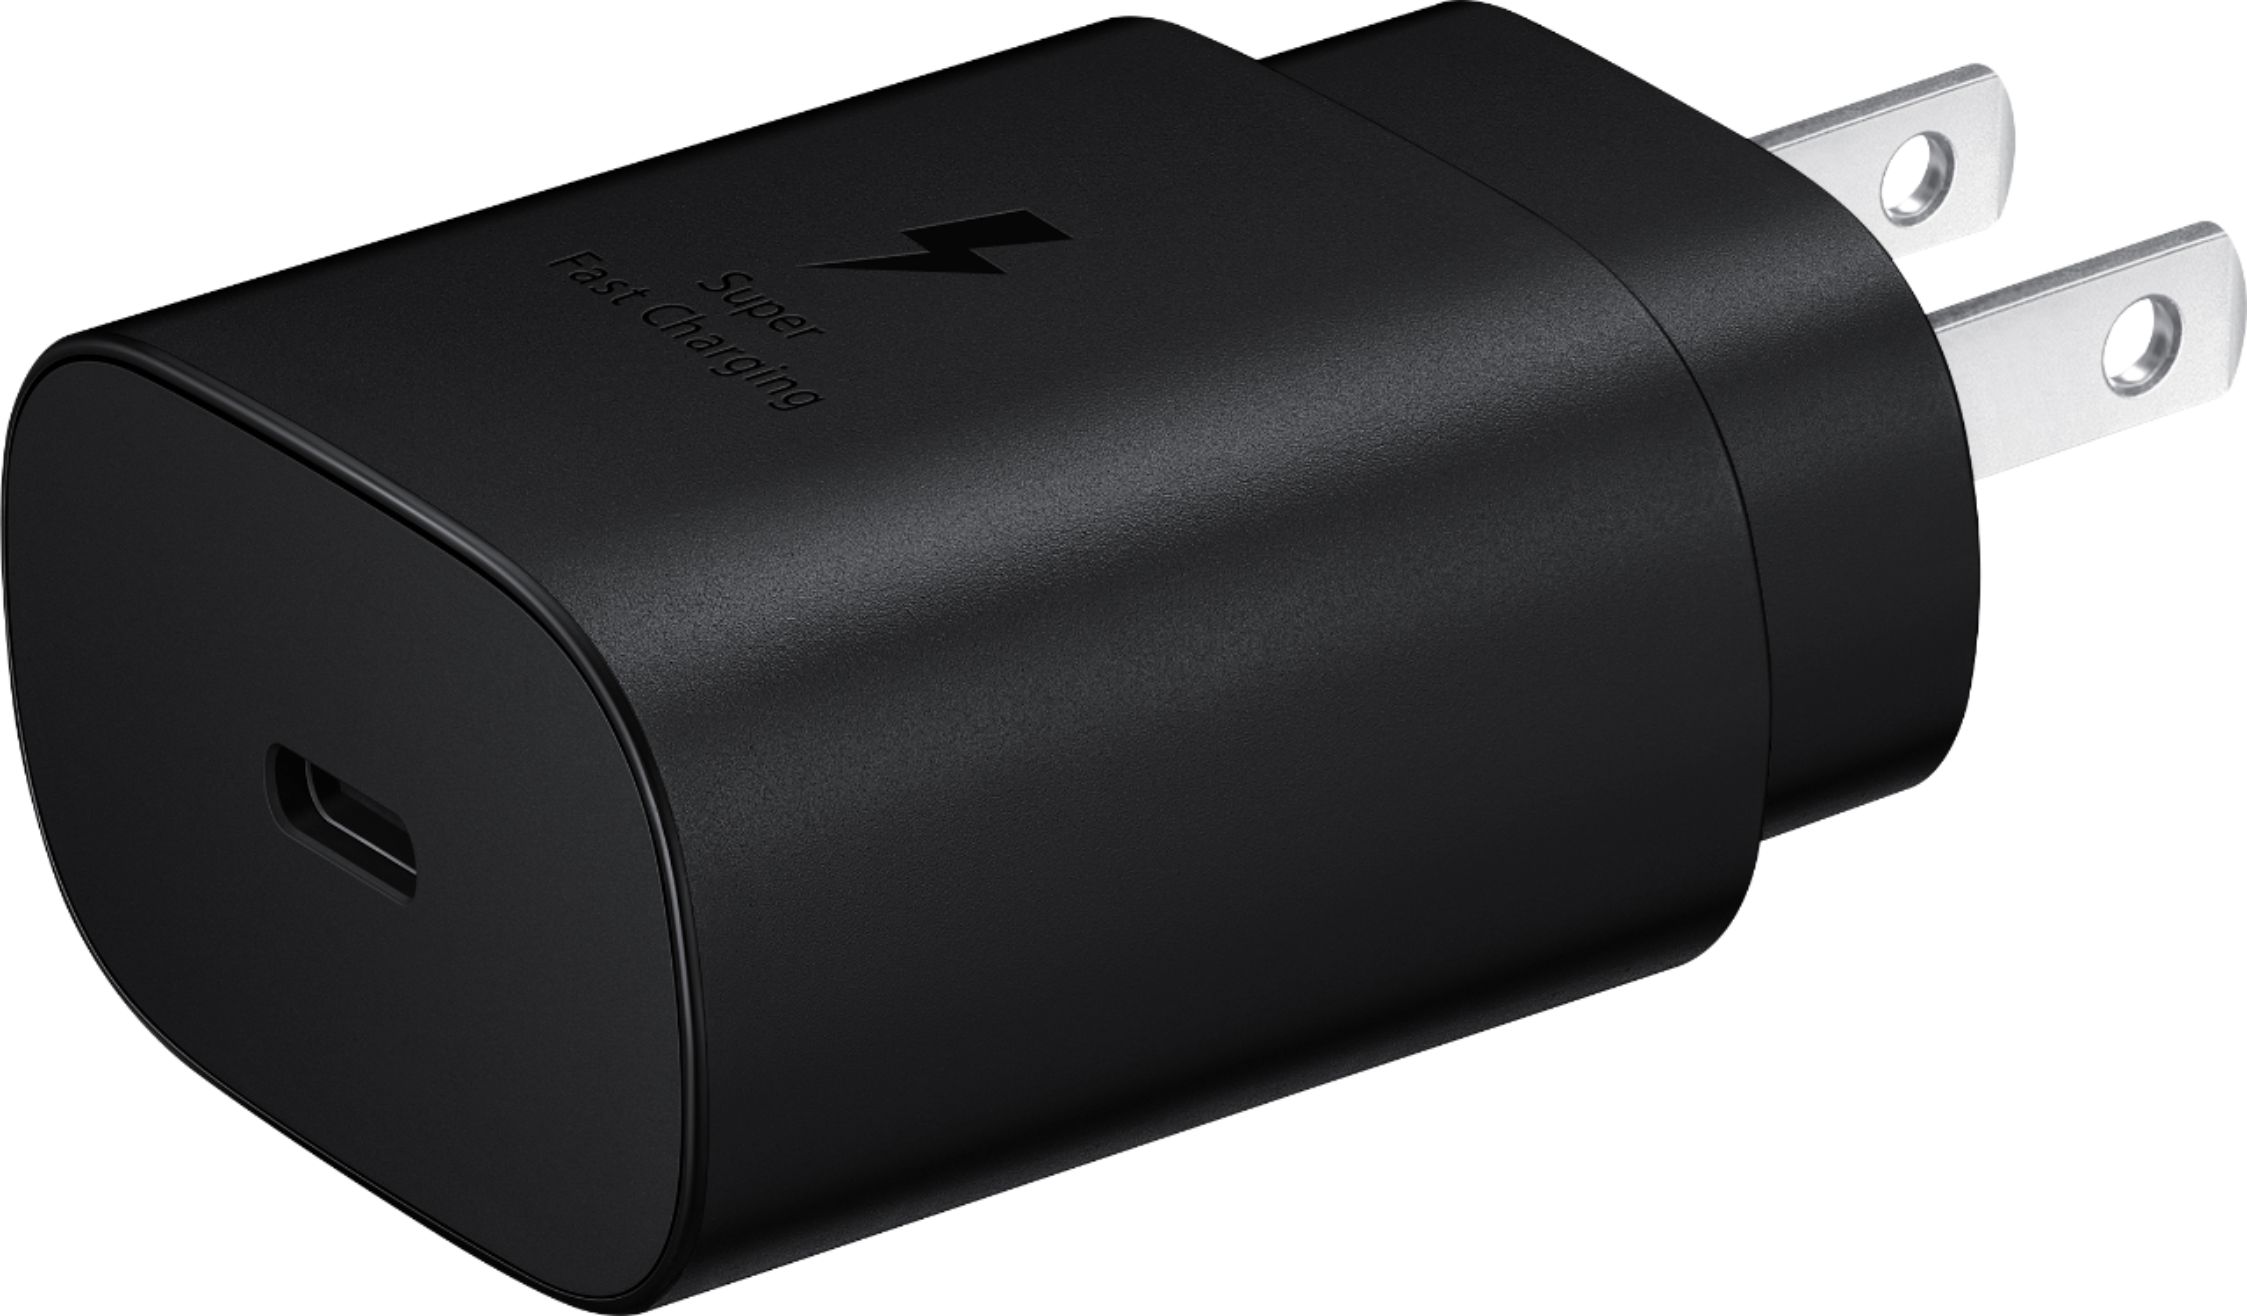 Samsung - Super Fast Charging 25W USB Type-C Wall Charger - Black